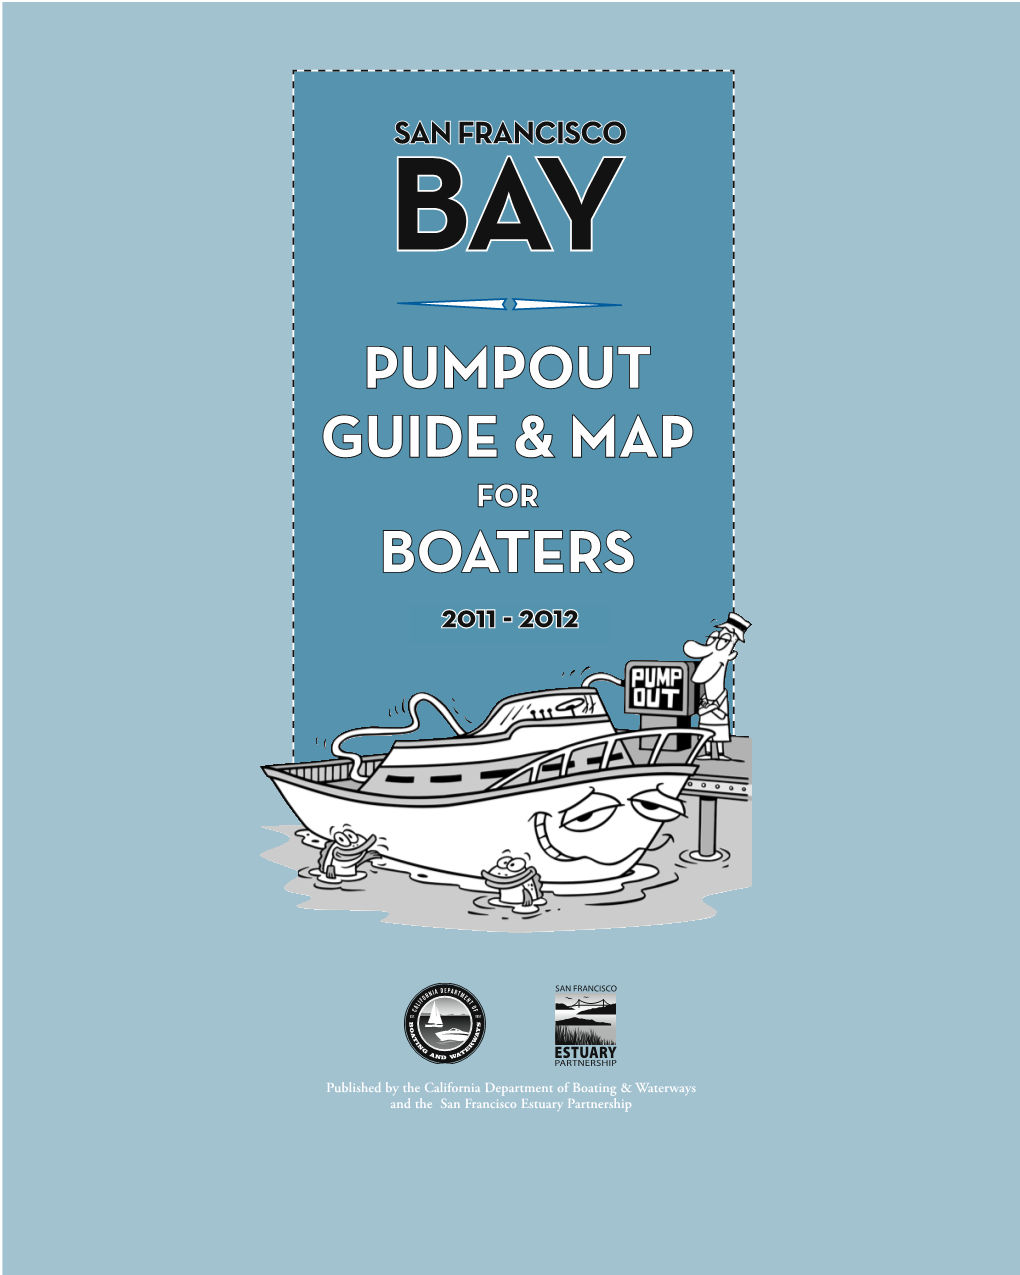 Pumpout Guide & Map Boaters